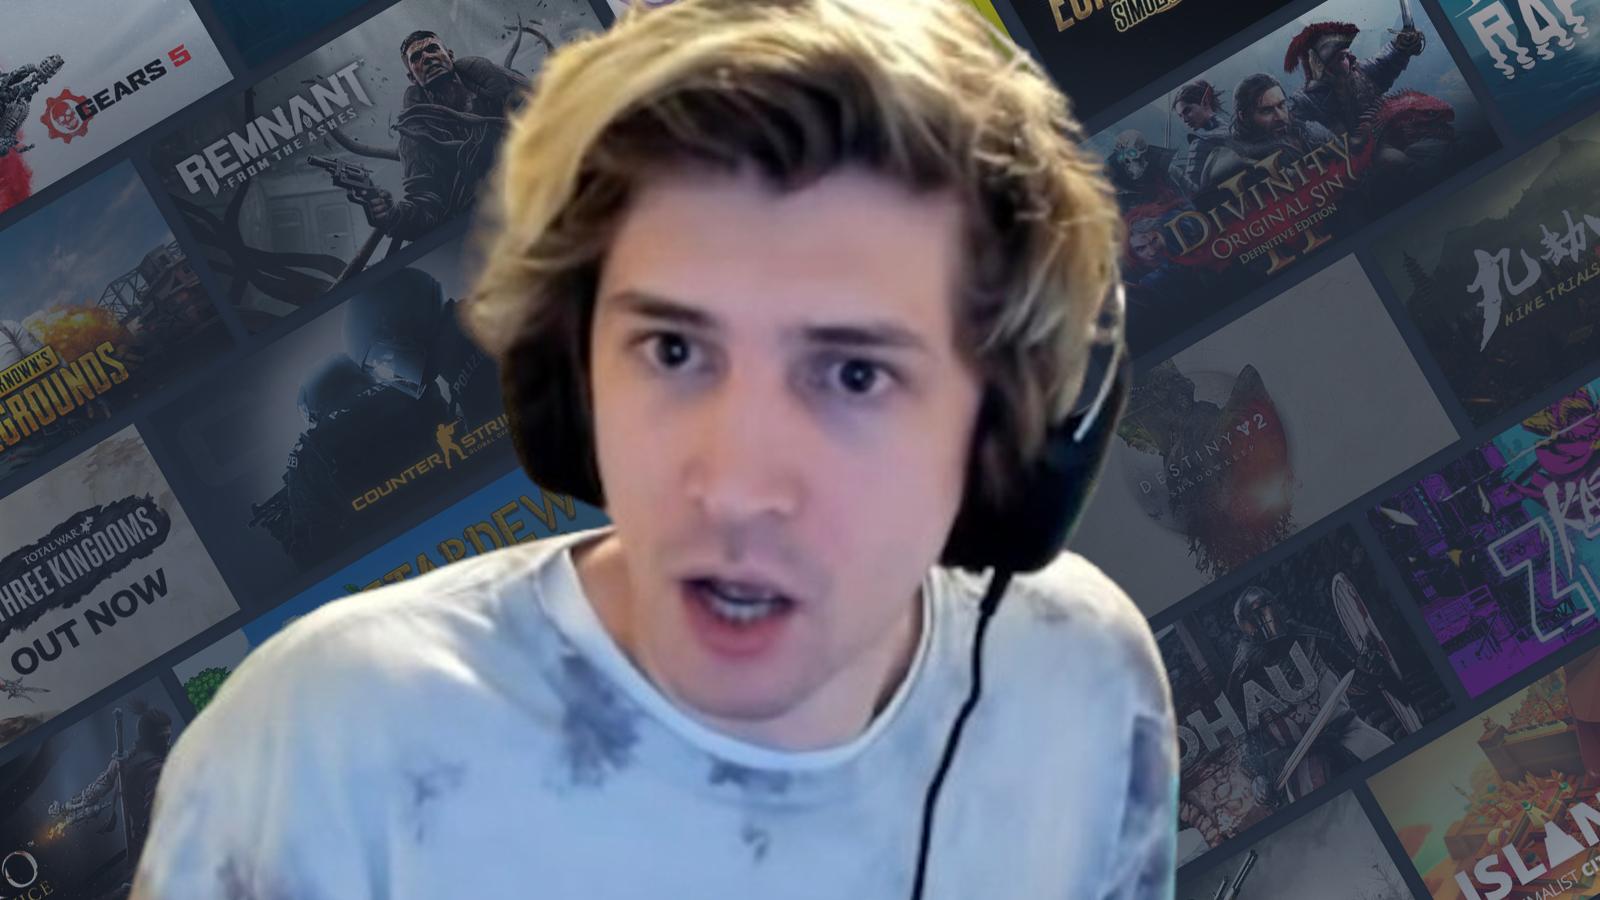 xQc in front of steam library